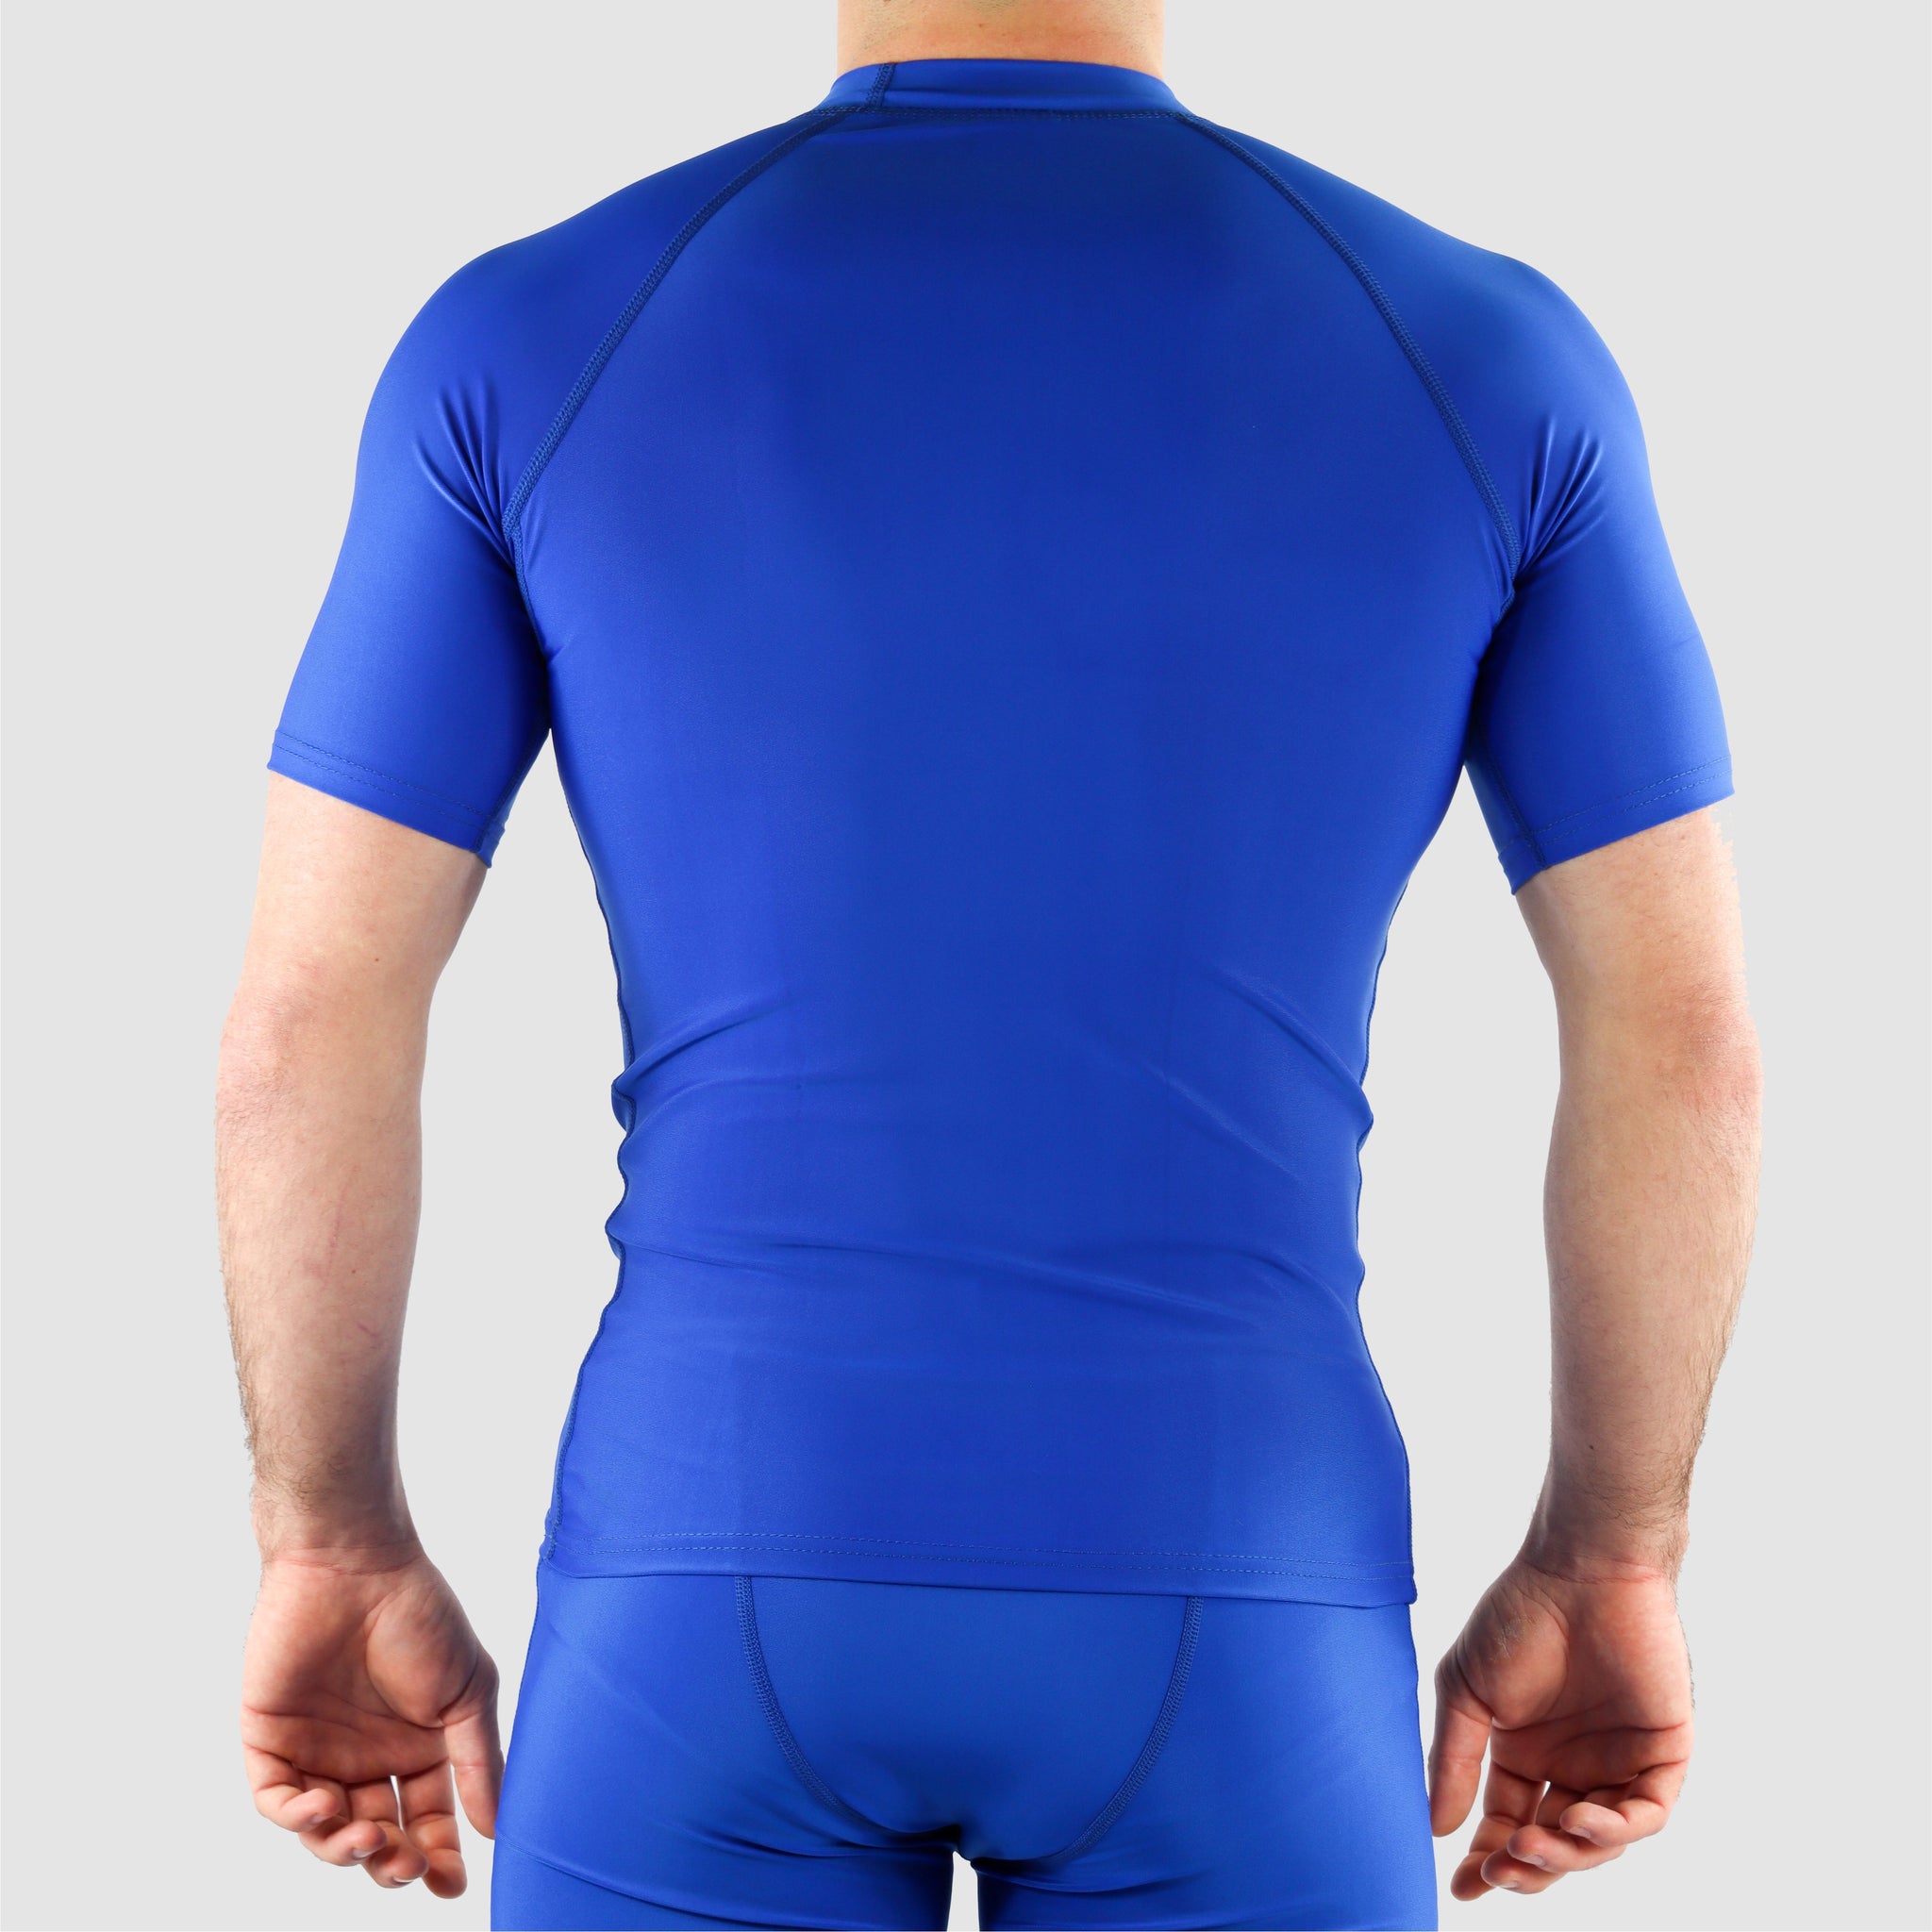 Royal blue DiDOO Men's Compression Base Layer Short Sleeve Tops